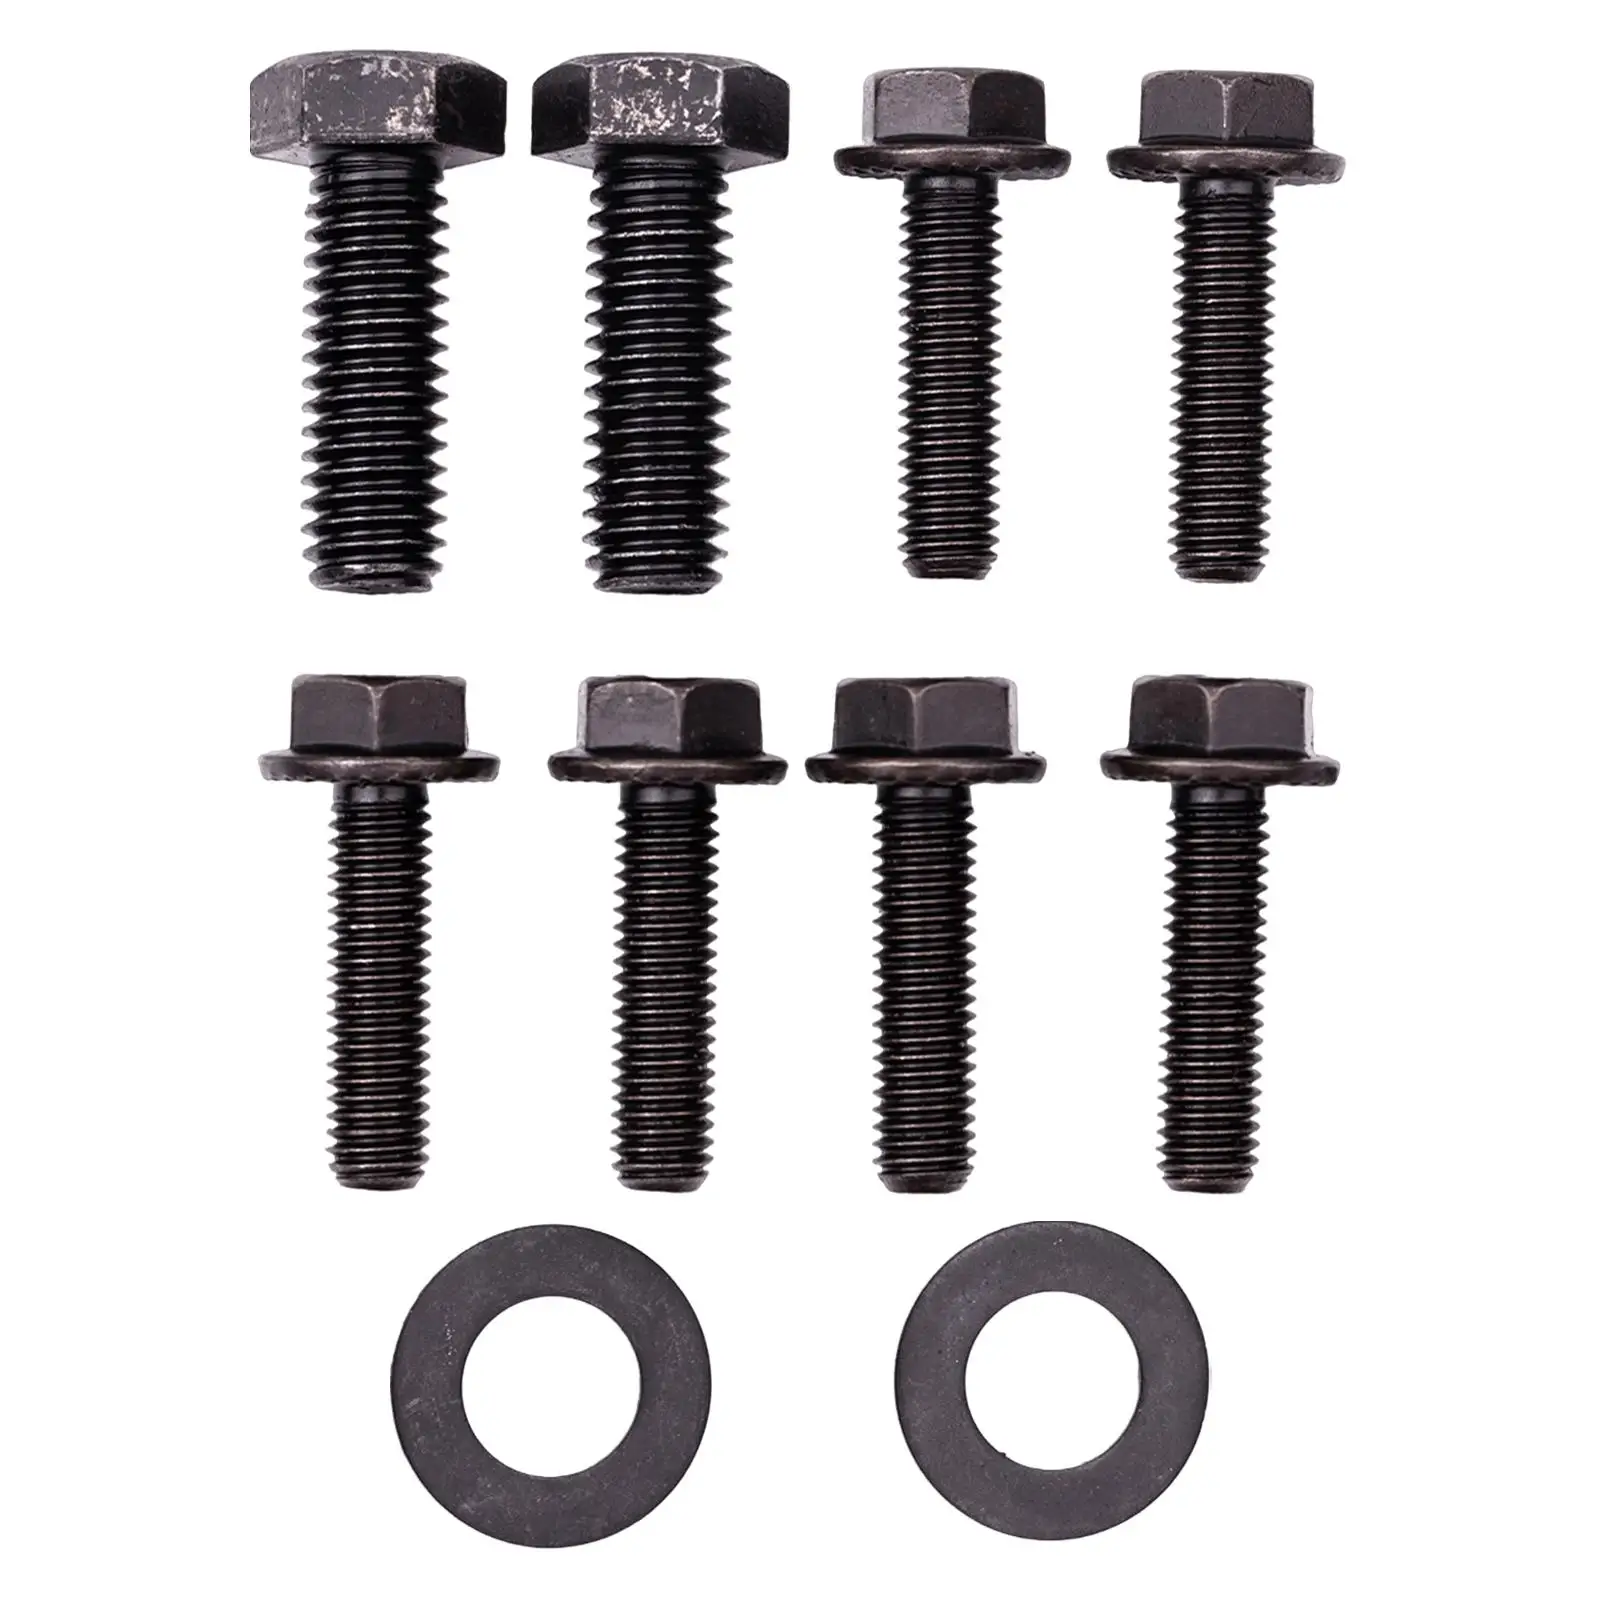 Front Seat Mounting Bolts Parts Professional Stable Performance Replaces Car Accessories for Jeep Wrangler TJ 1997 - 2006